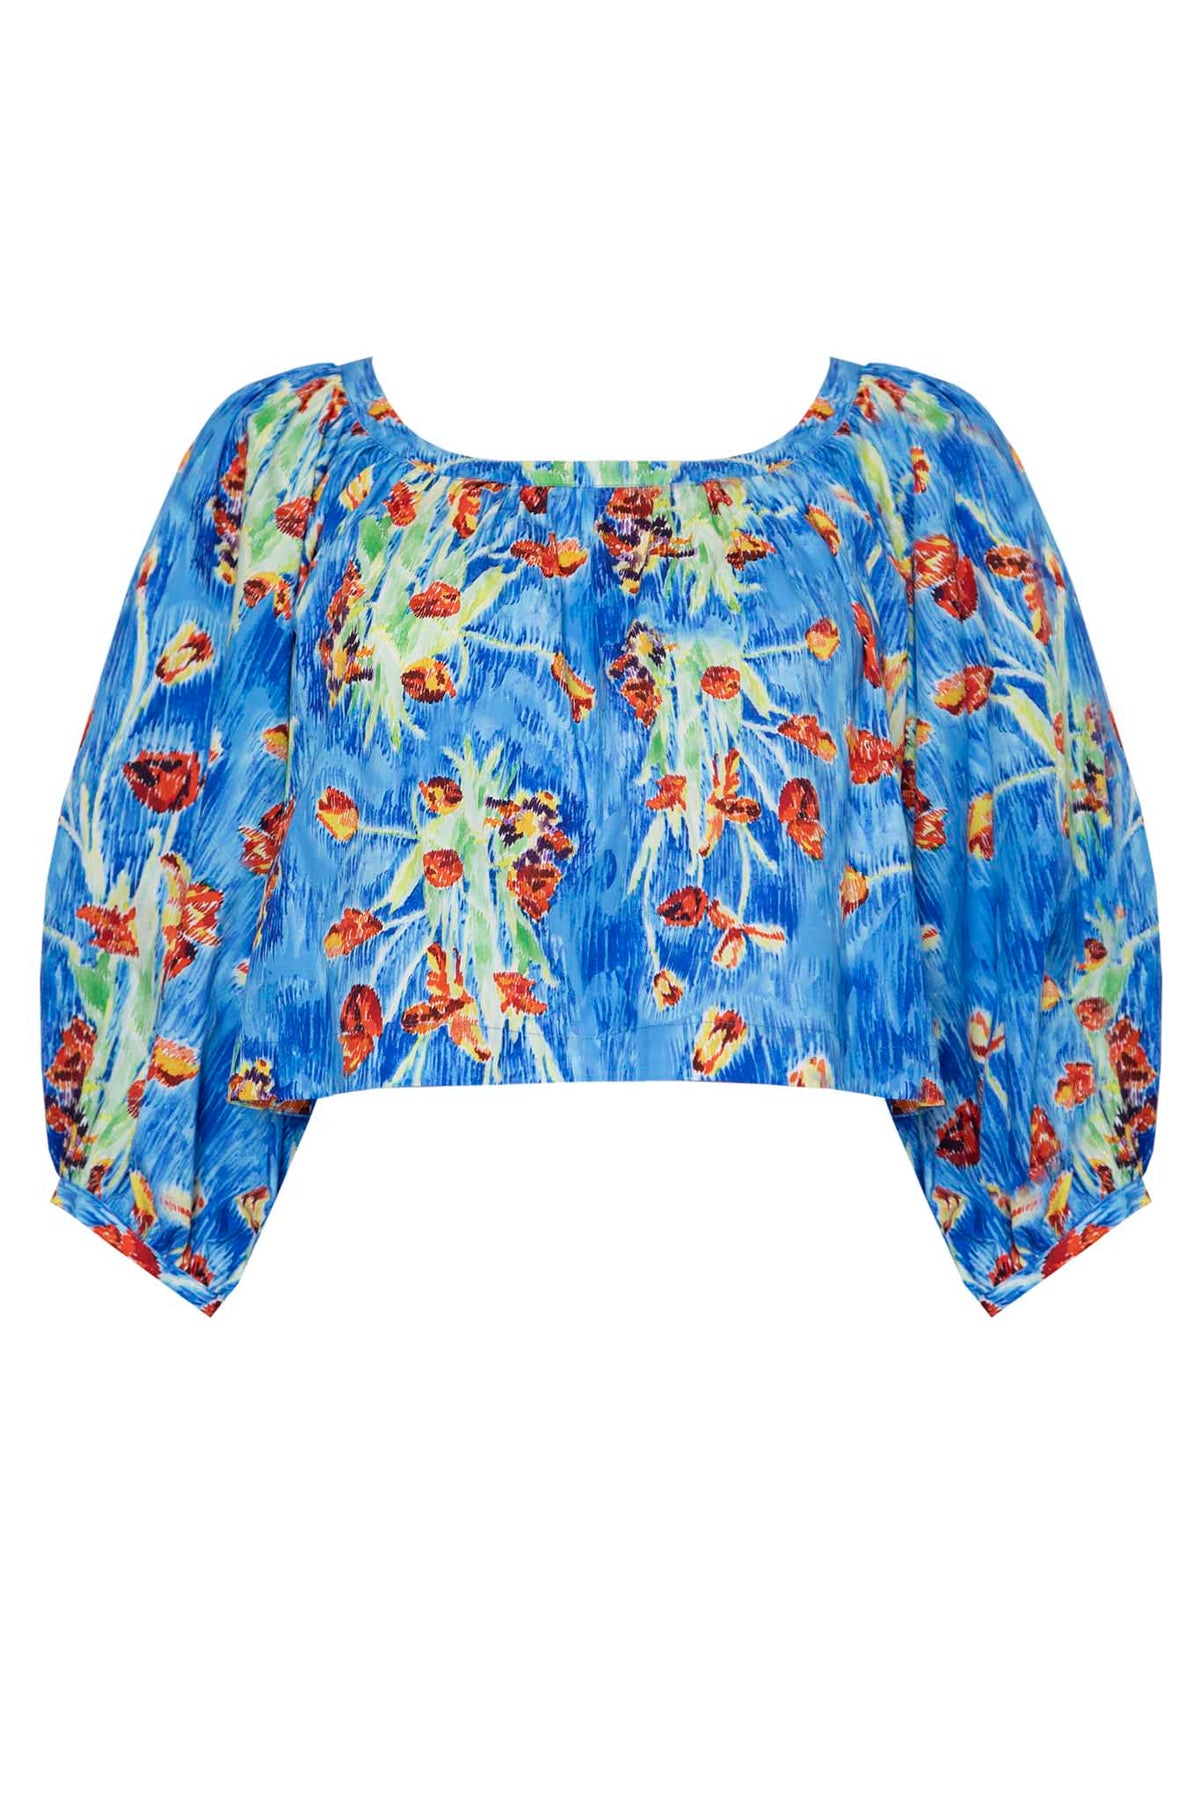 The cropped Daisy top has a scoop neckline and elbow-length balloon sleeves with banded cuffs.